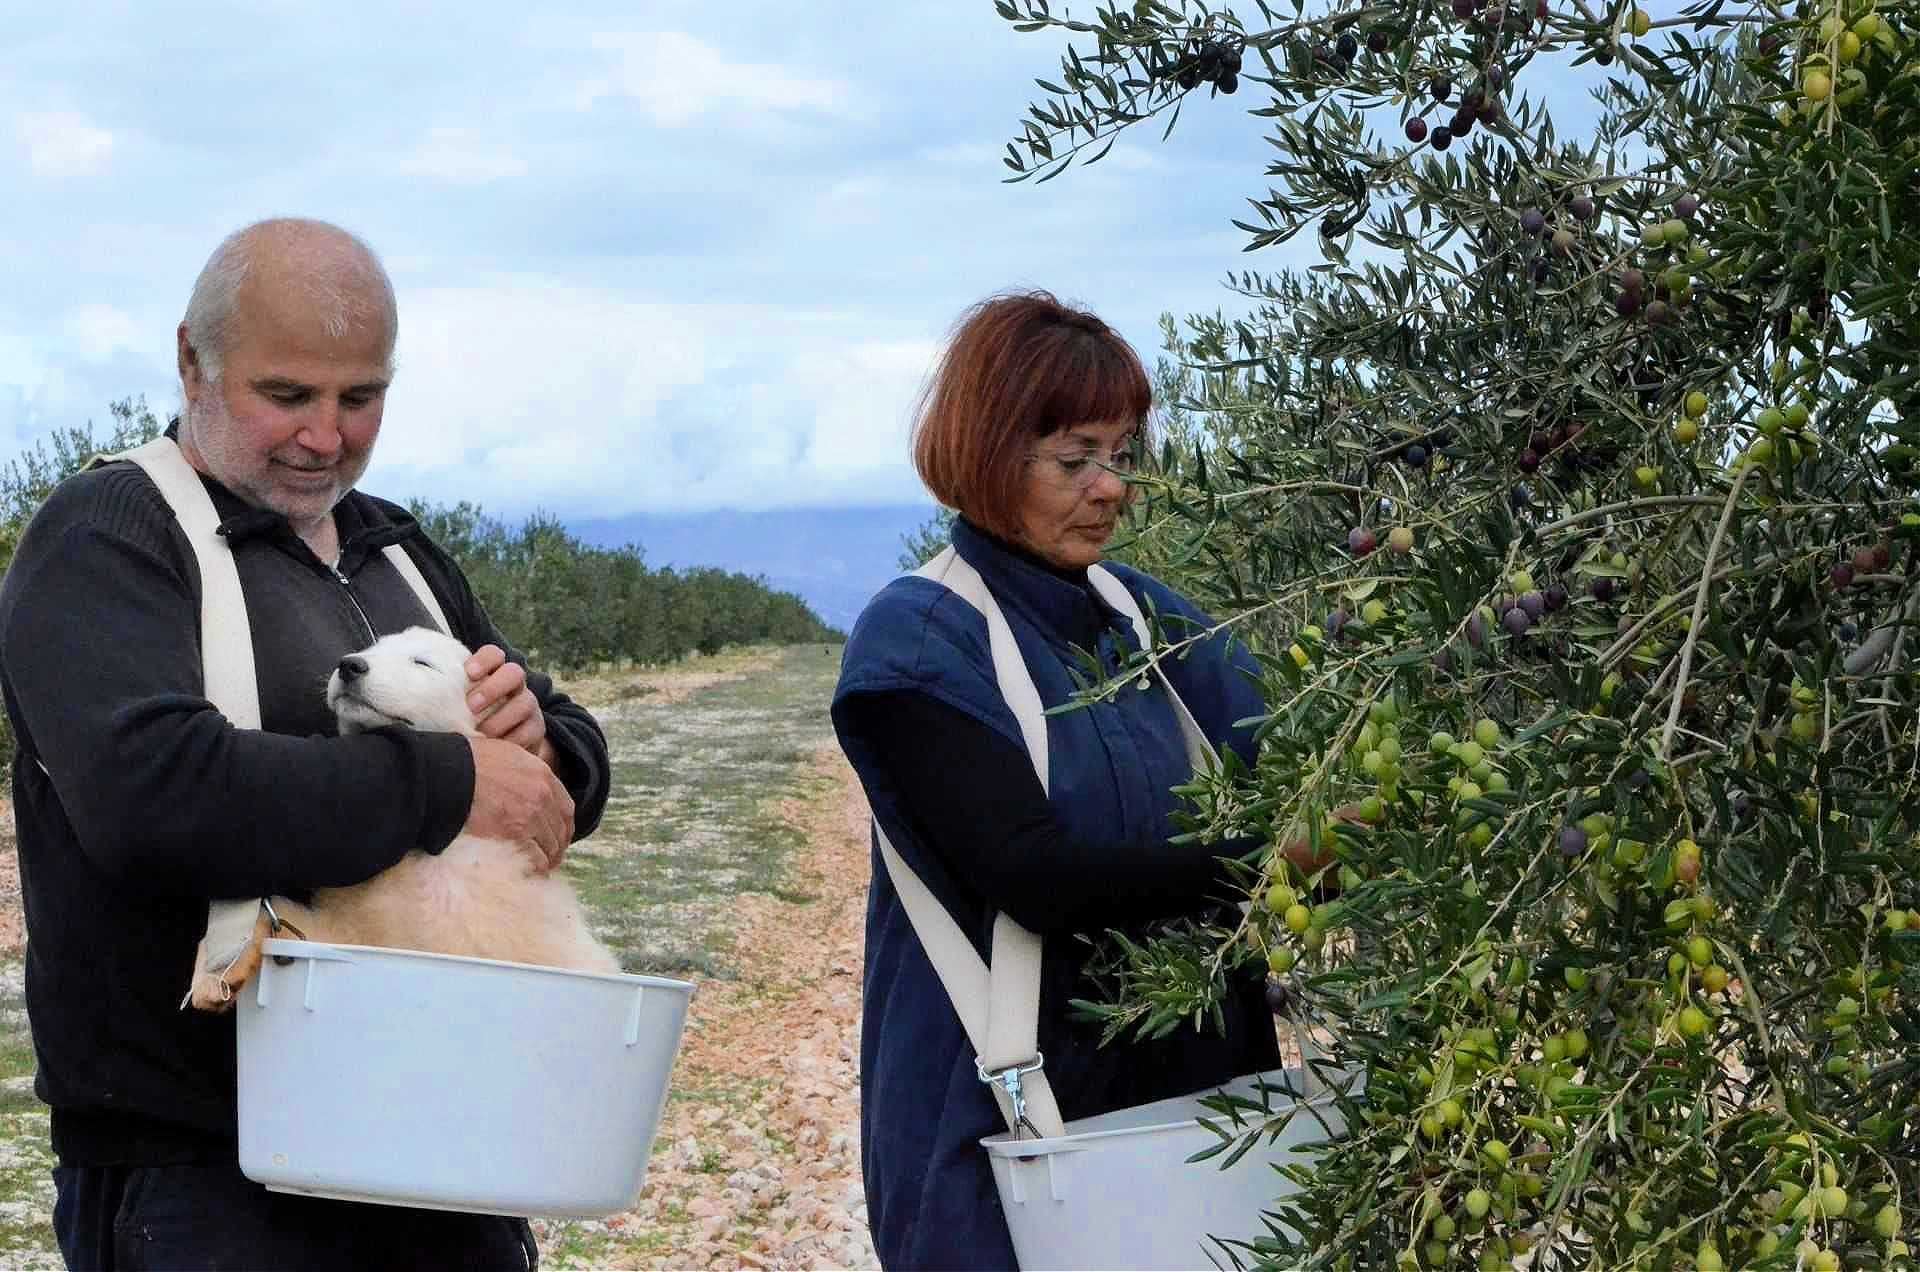 profiles-production-tragedy-inspires-one-croatian-family-to-grow-olives-olive-oil-times